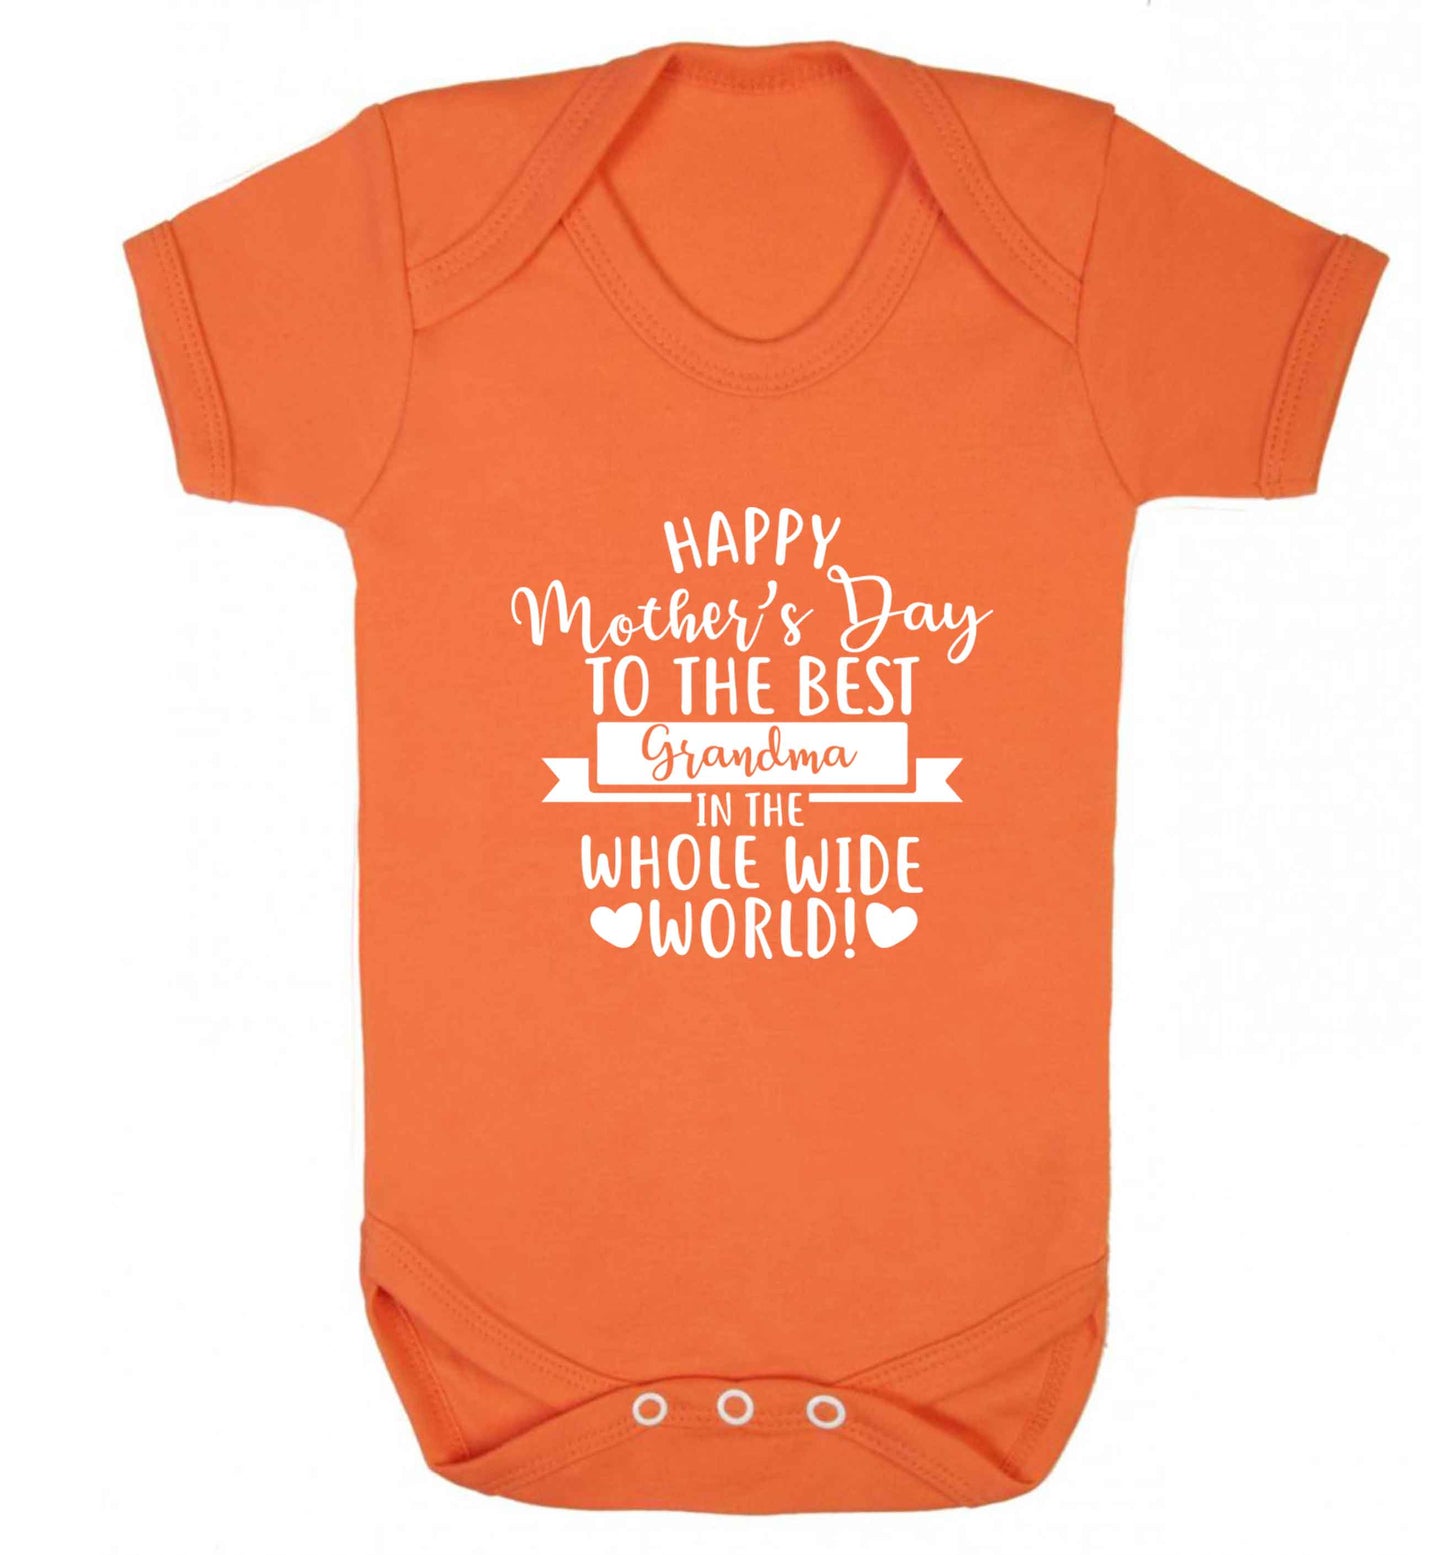 Happy mother's day to the best grandma in the world baby vest orange 18-24 months